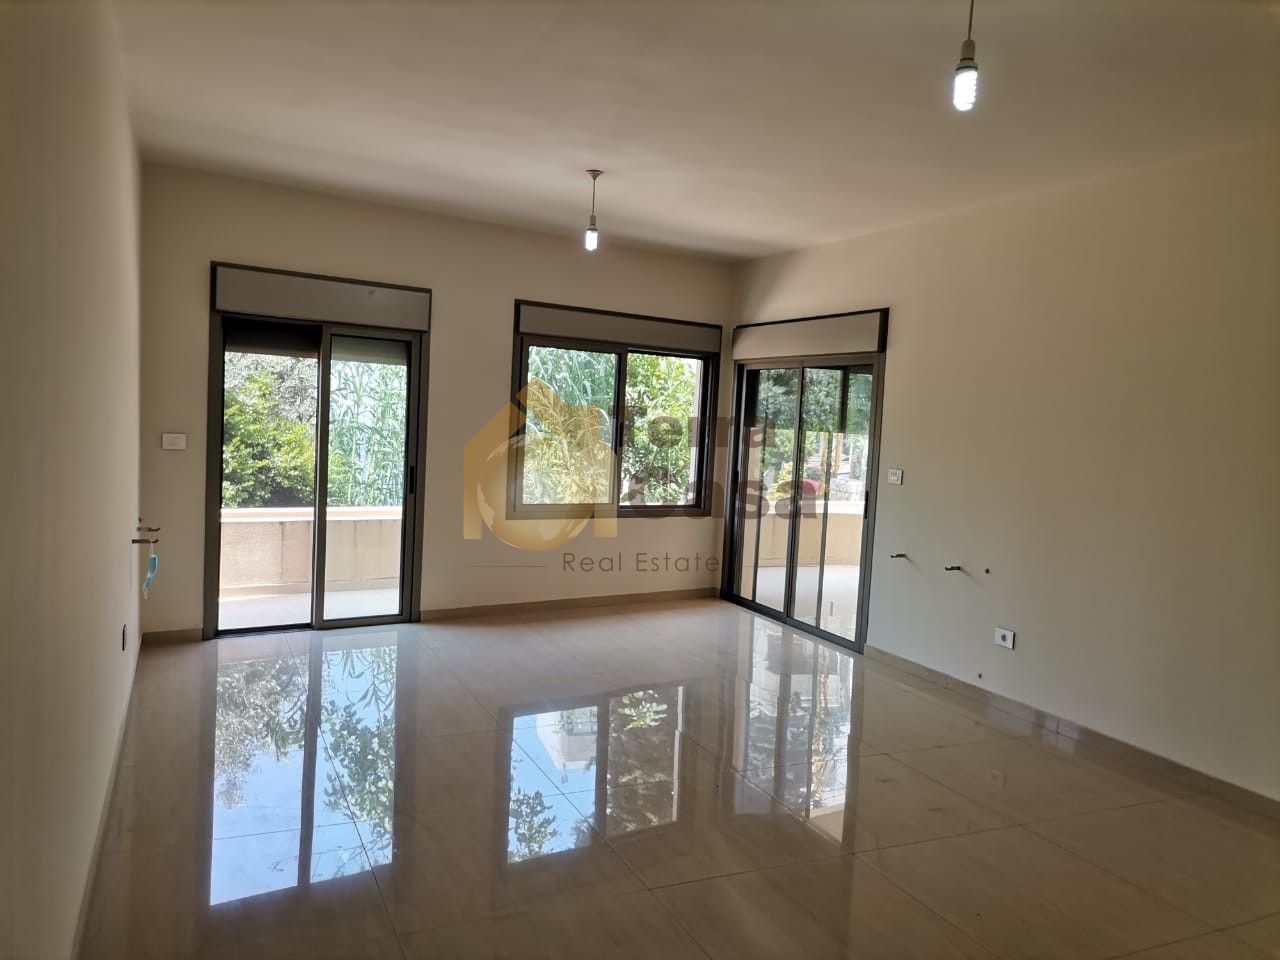 Brand new apartment with terrace cash payment. Ref#2737